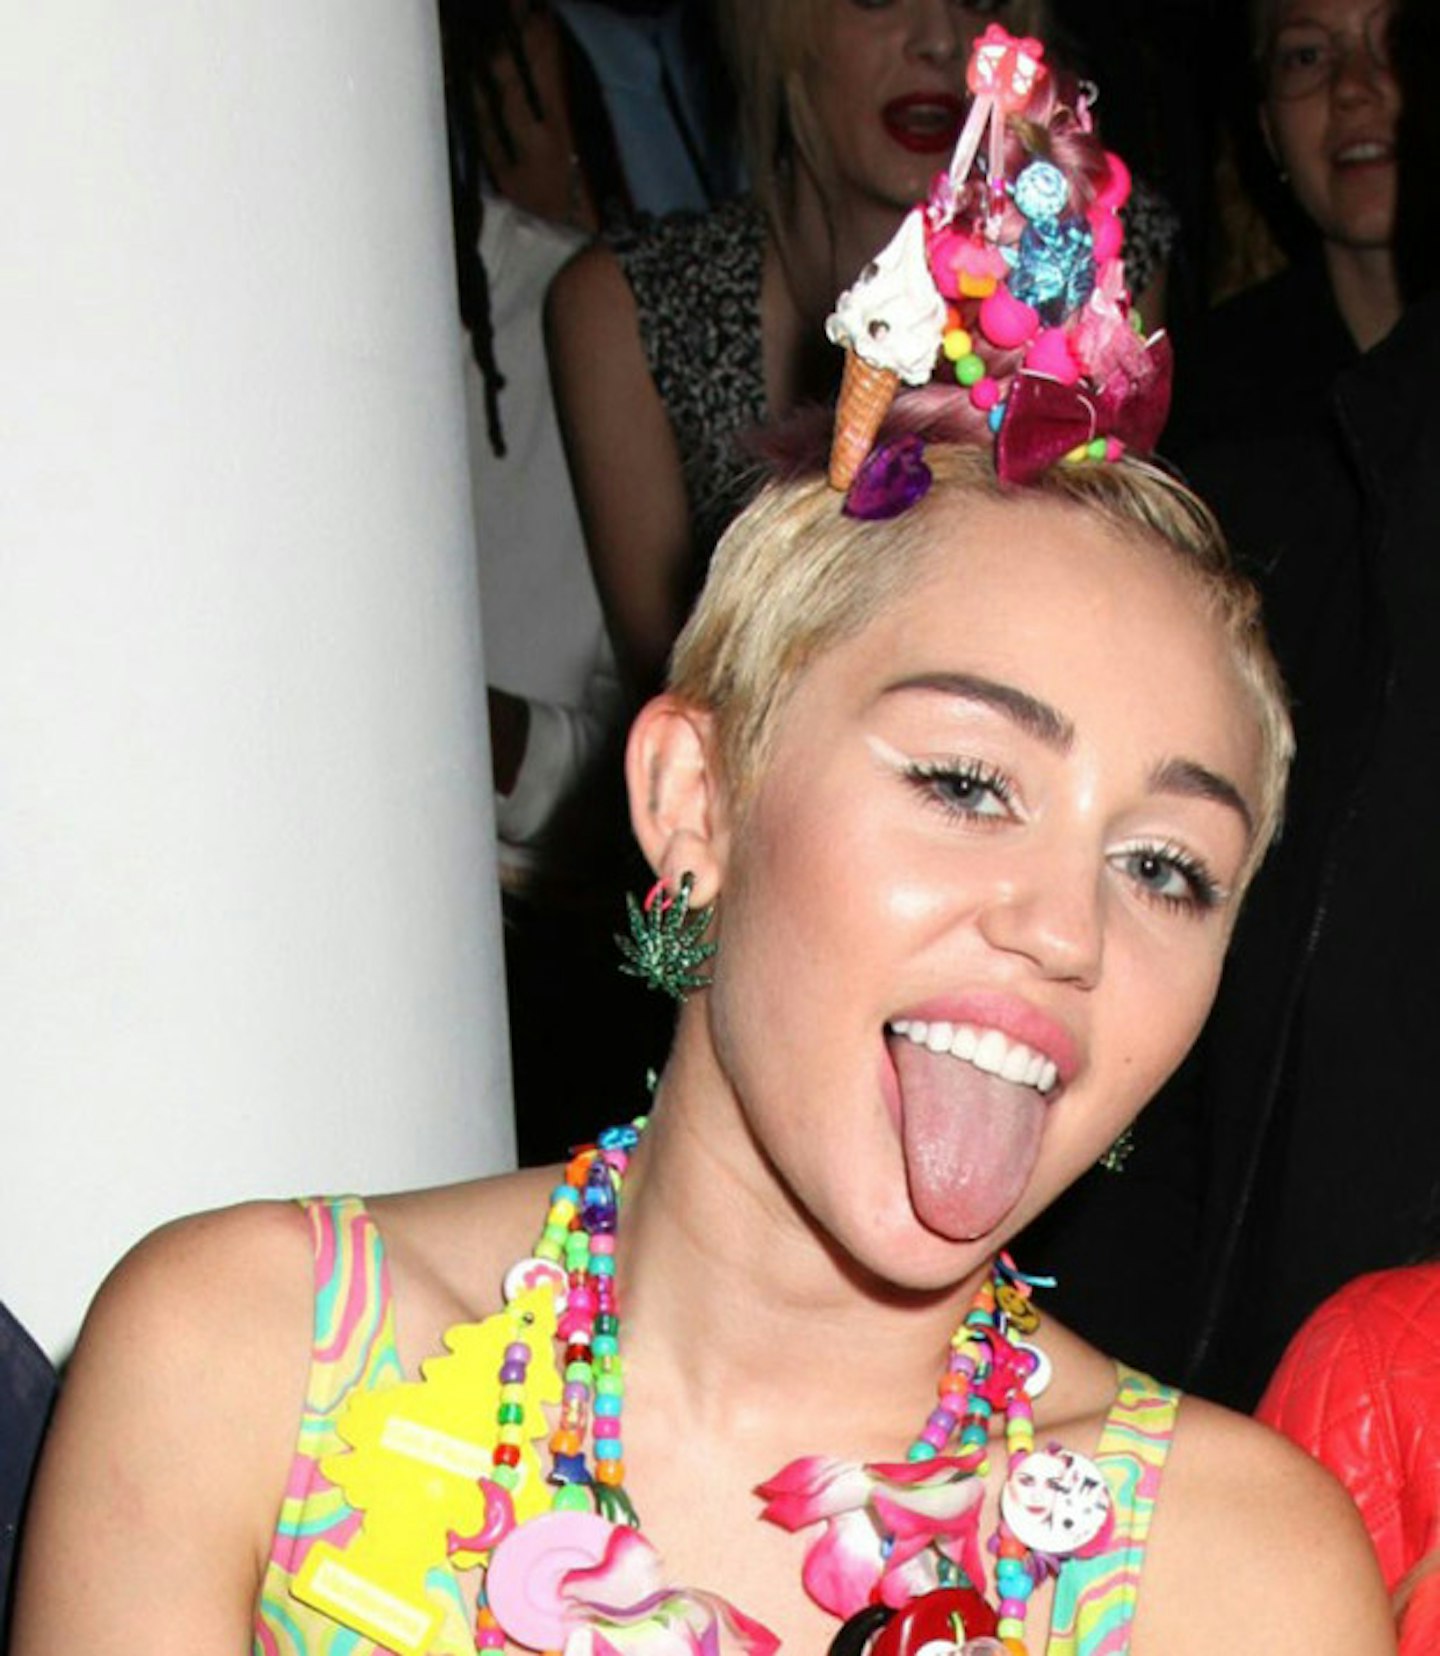 Miley and her tongue, obvs